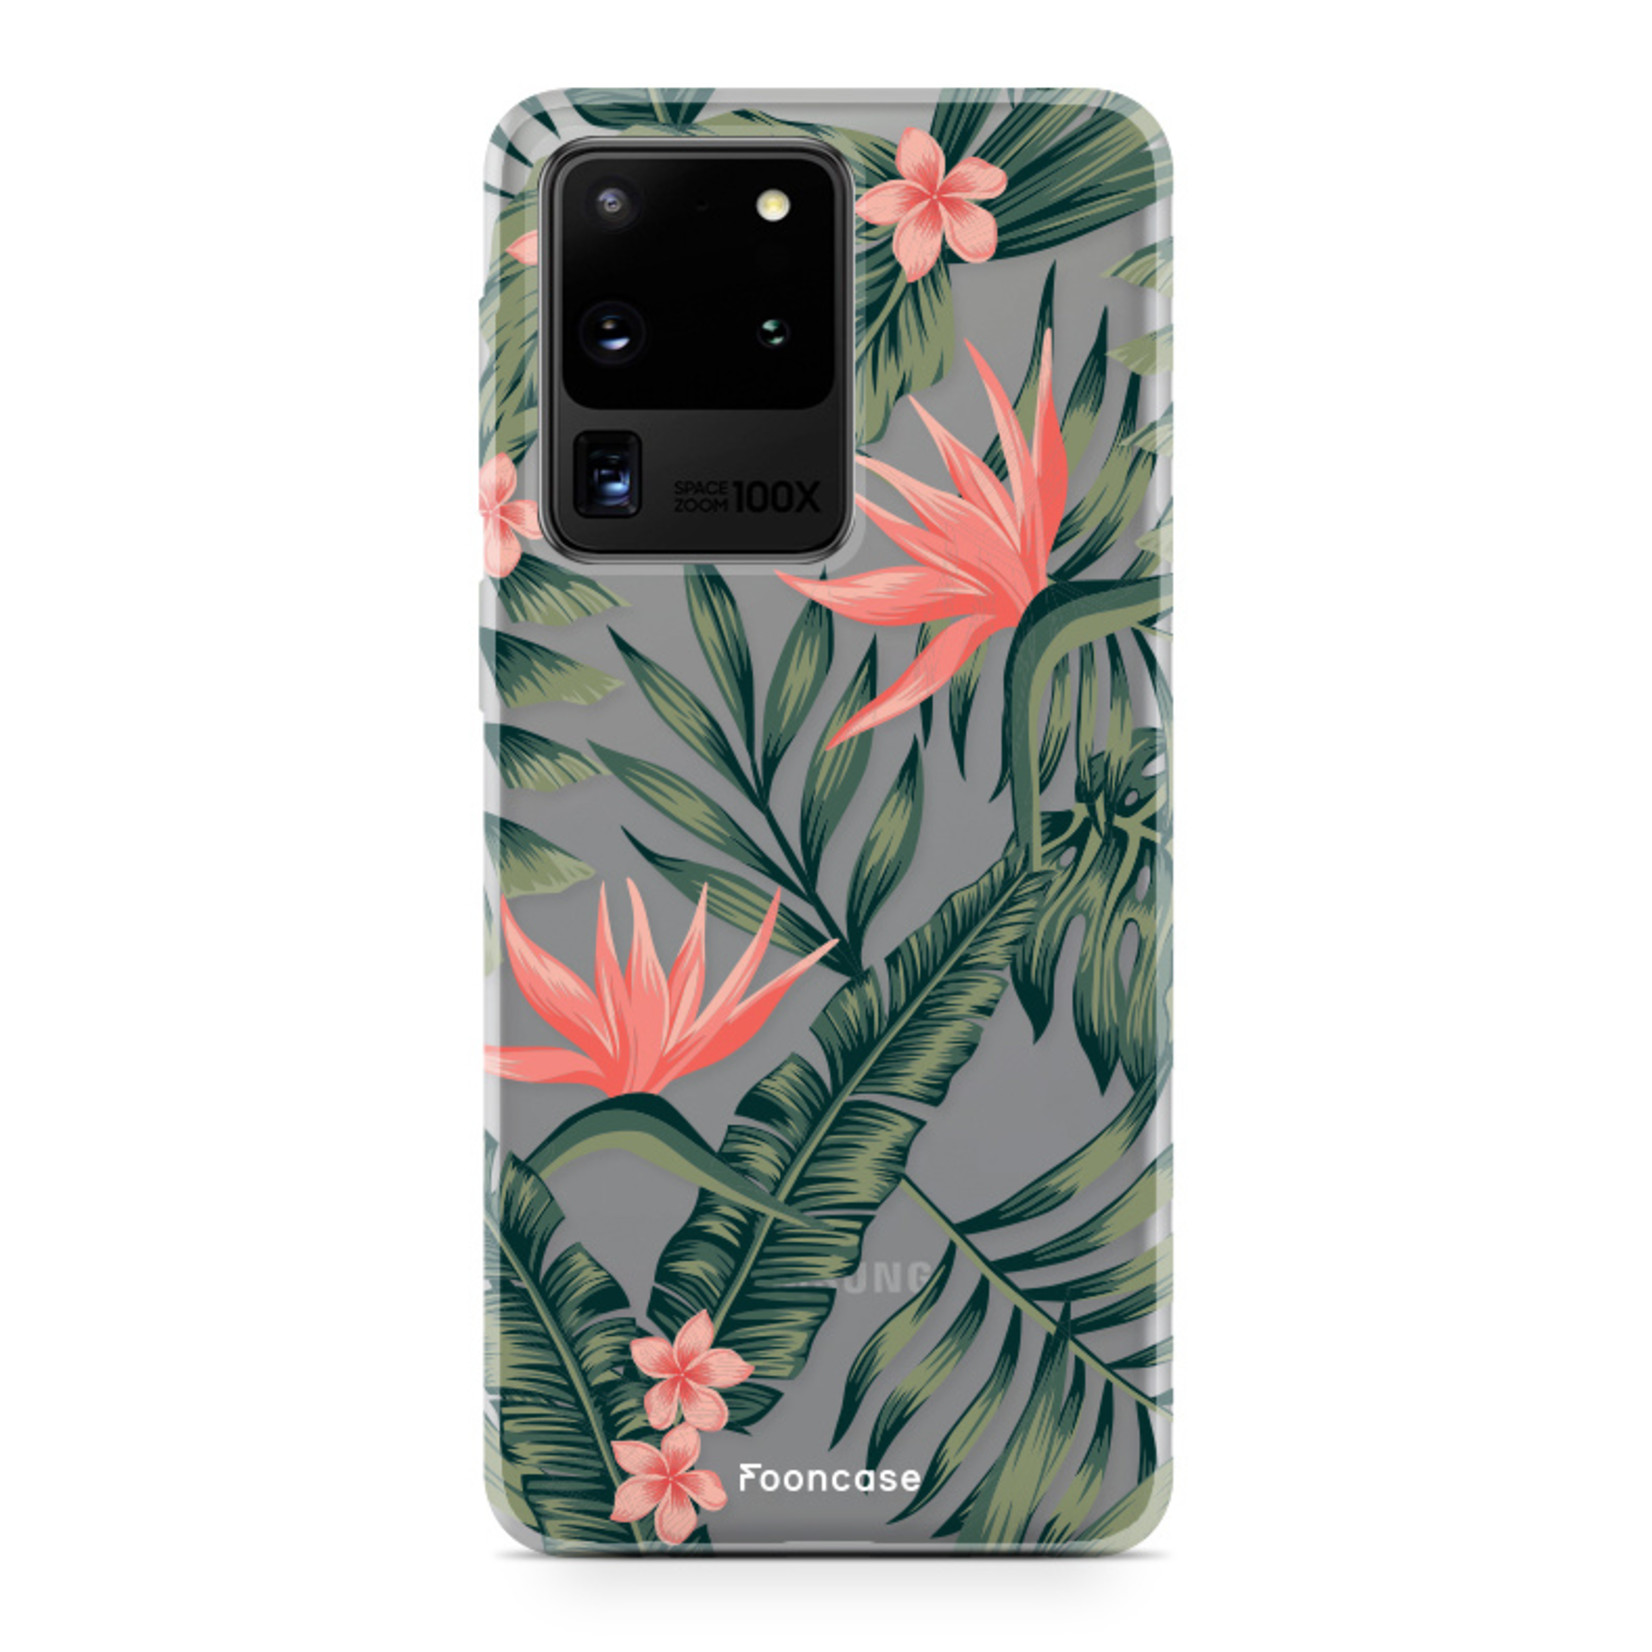 FOONCASE Samsung Galaxy S20 Ultra hoesje TPU Soft Case - Back Cover - Tropical Desire / Bladeren / Roze